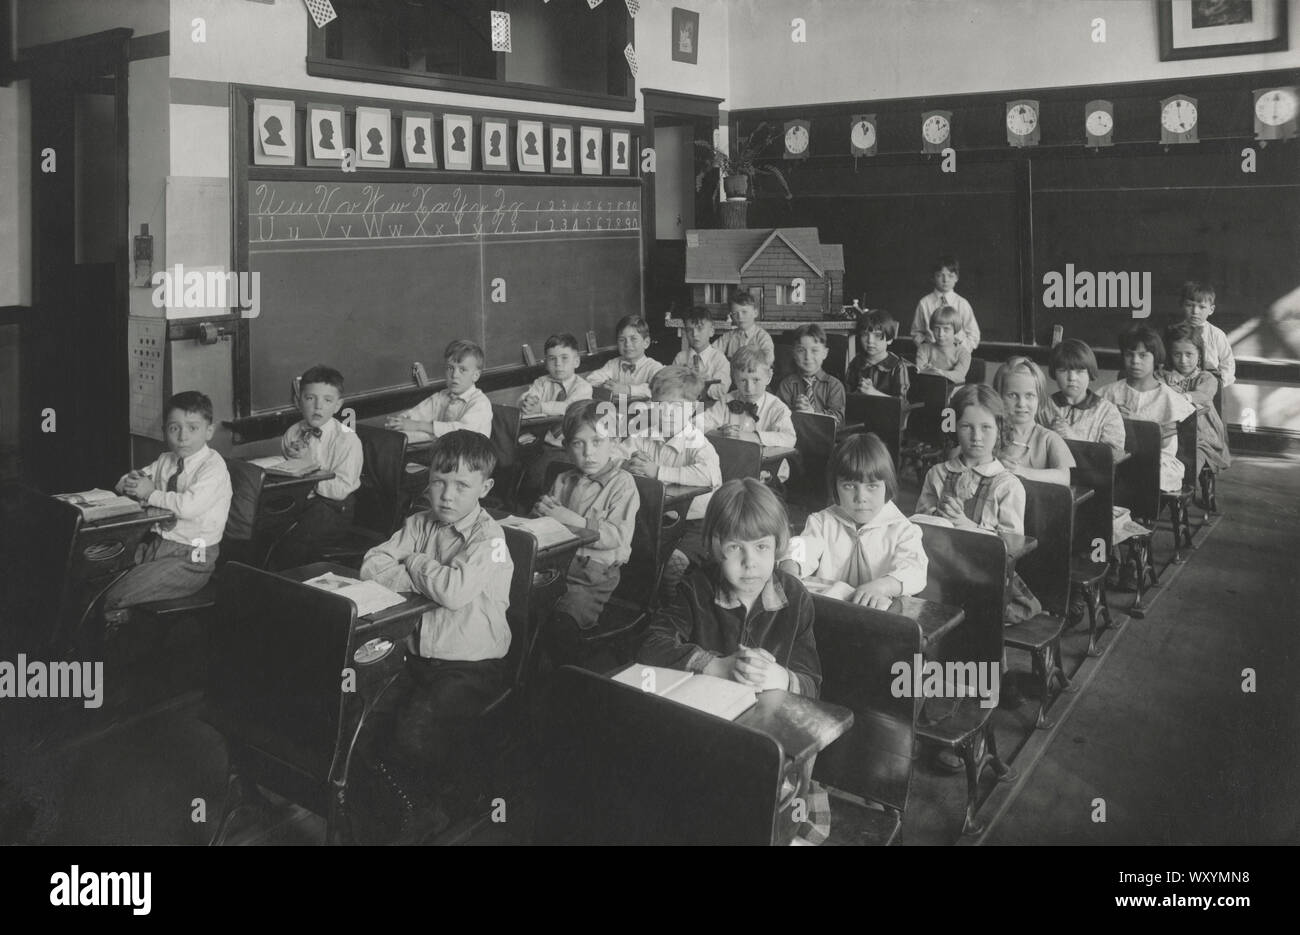 1930s School High Resolution Stock Photography and Images - Alamy